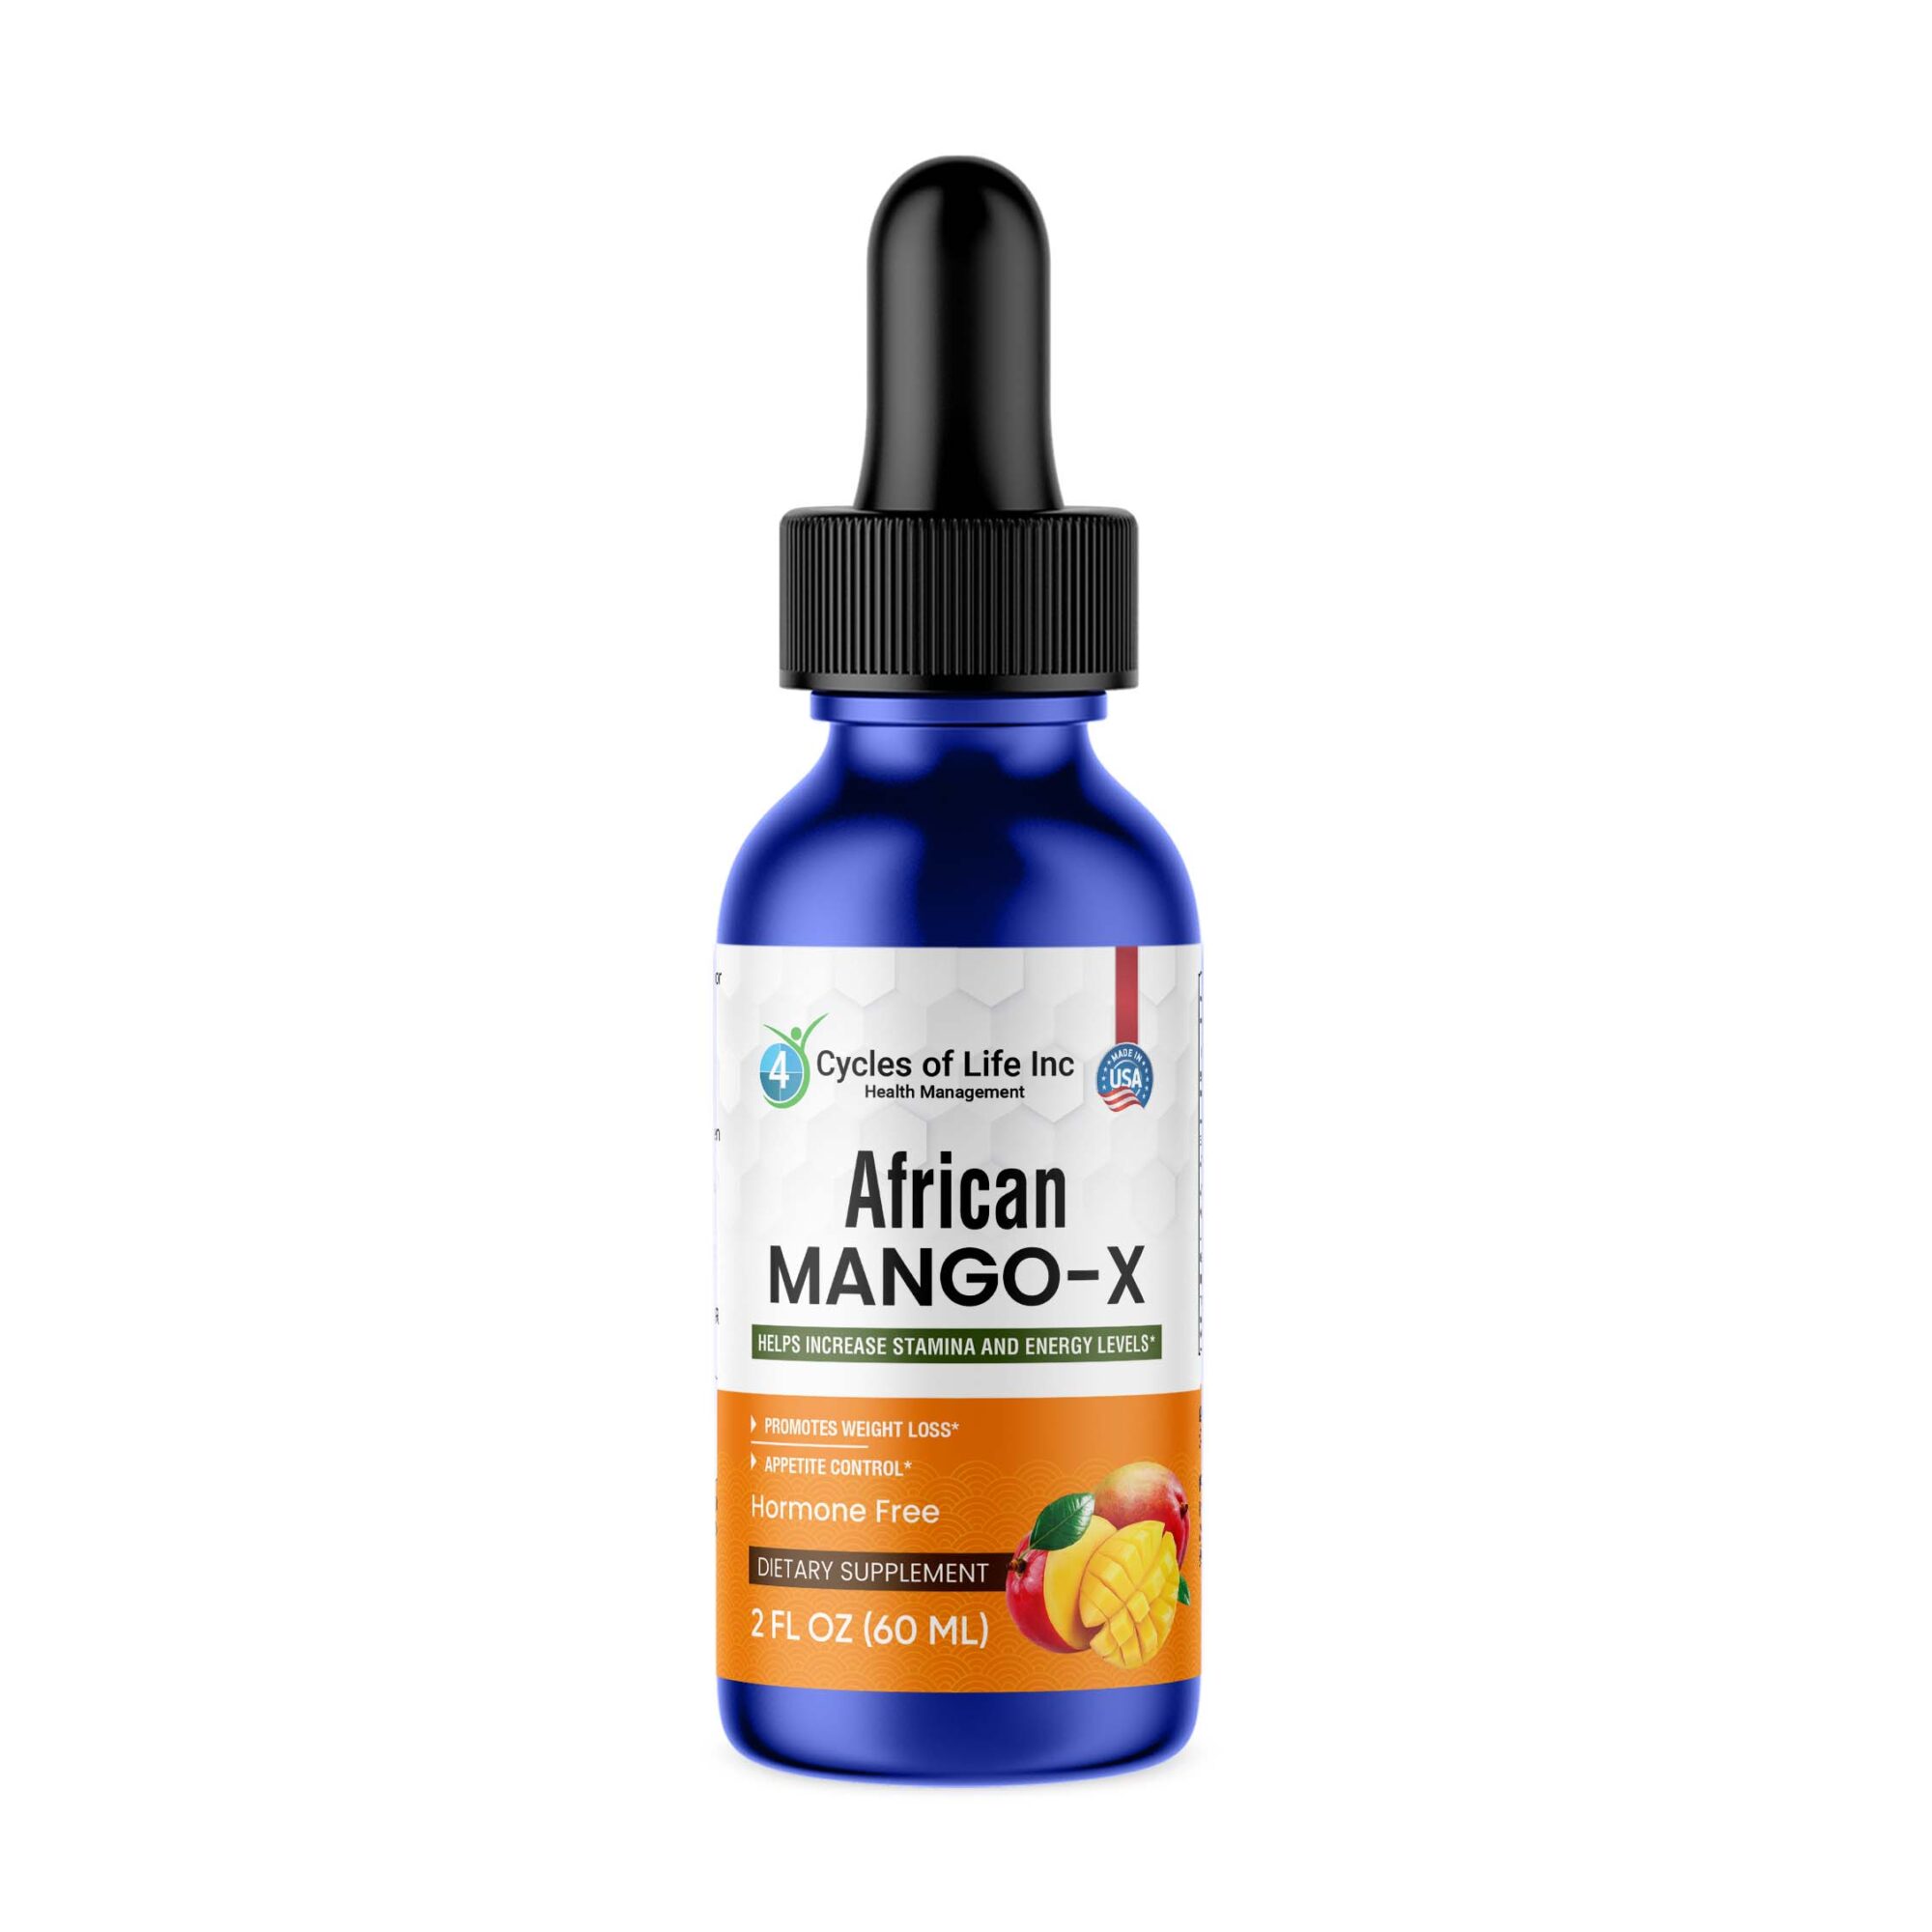 African Mango-X - 4 Cycles of Life Inc